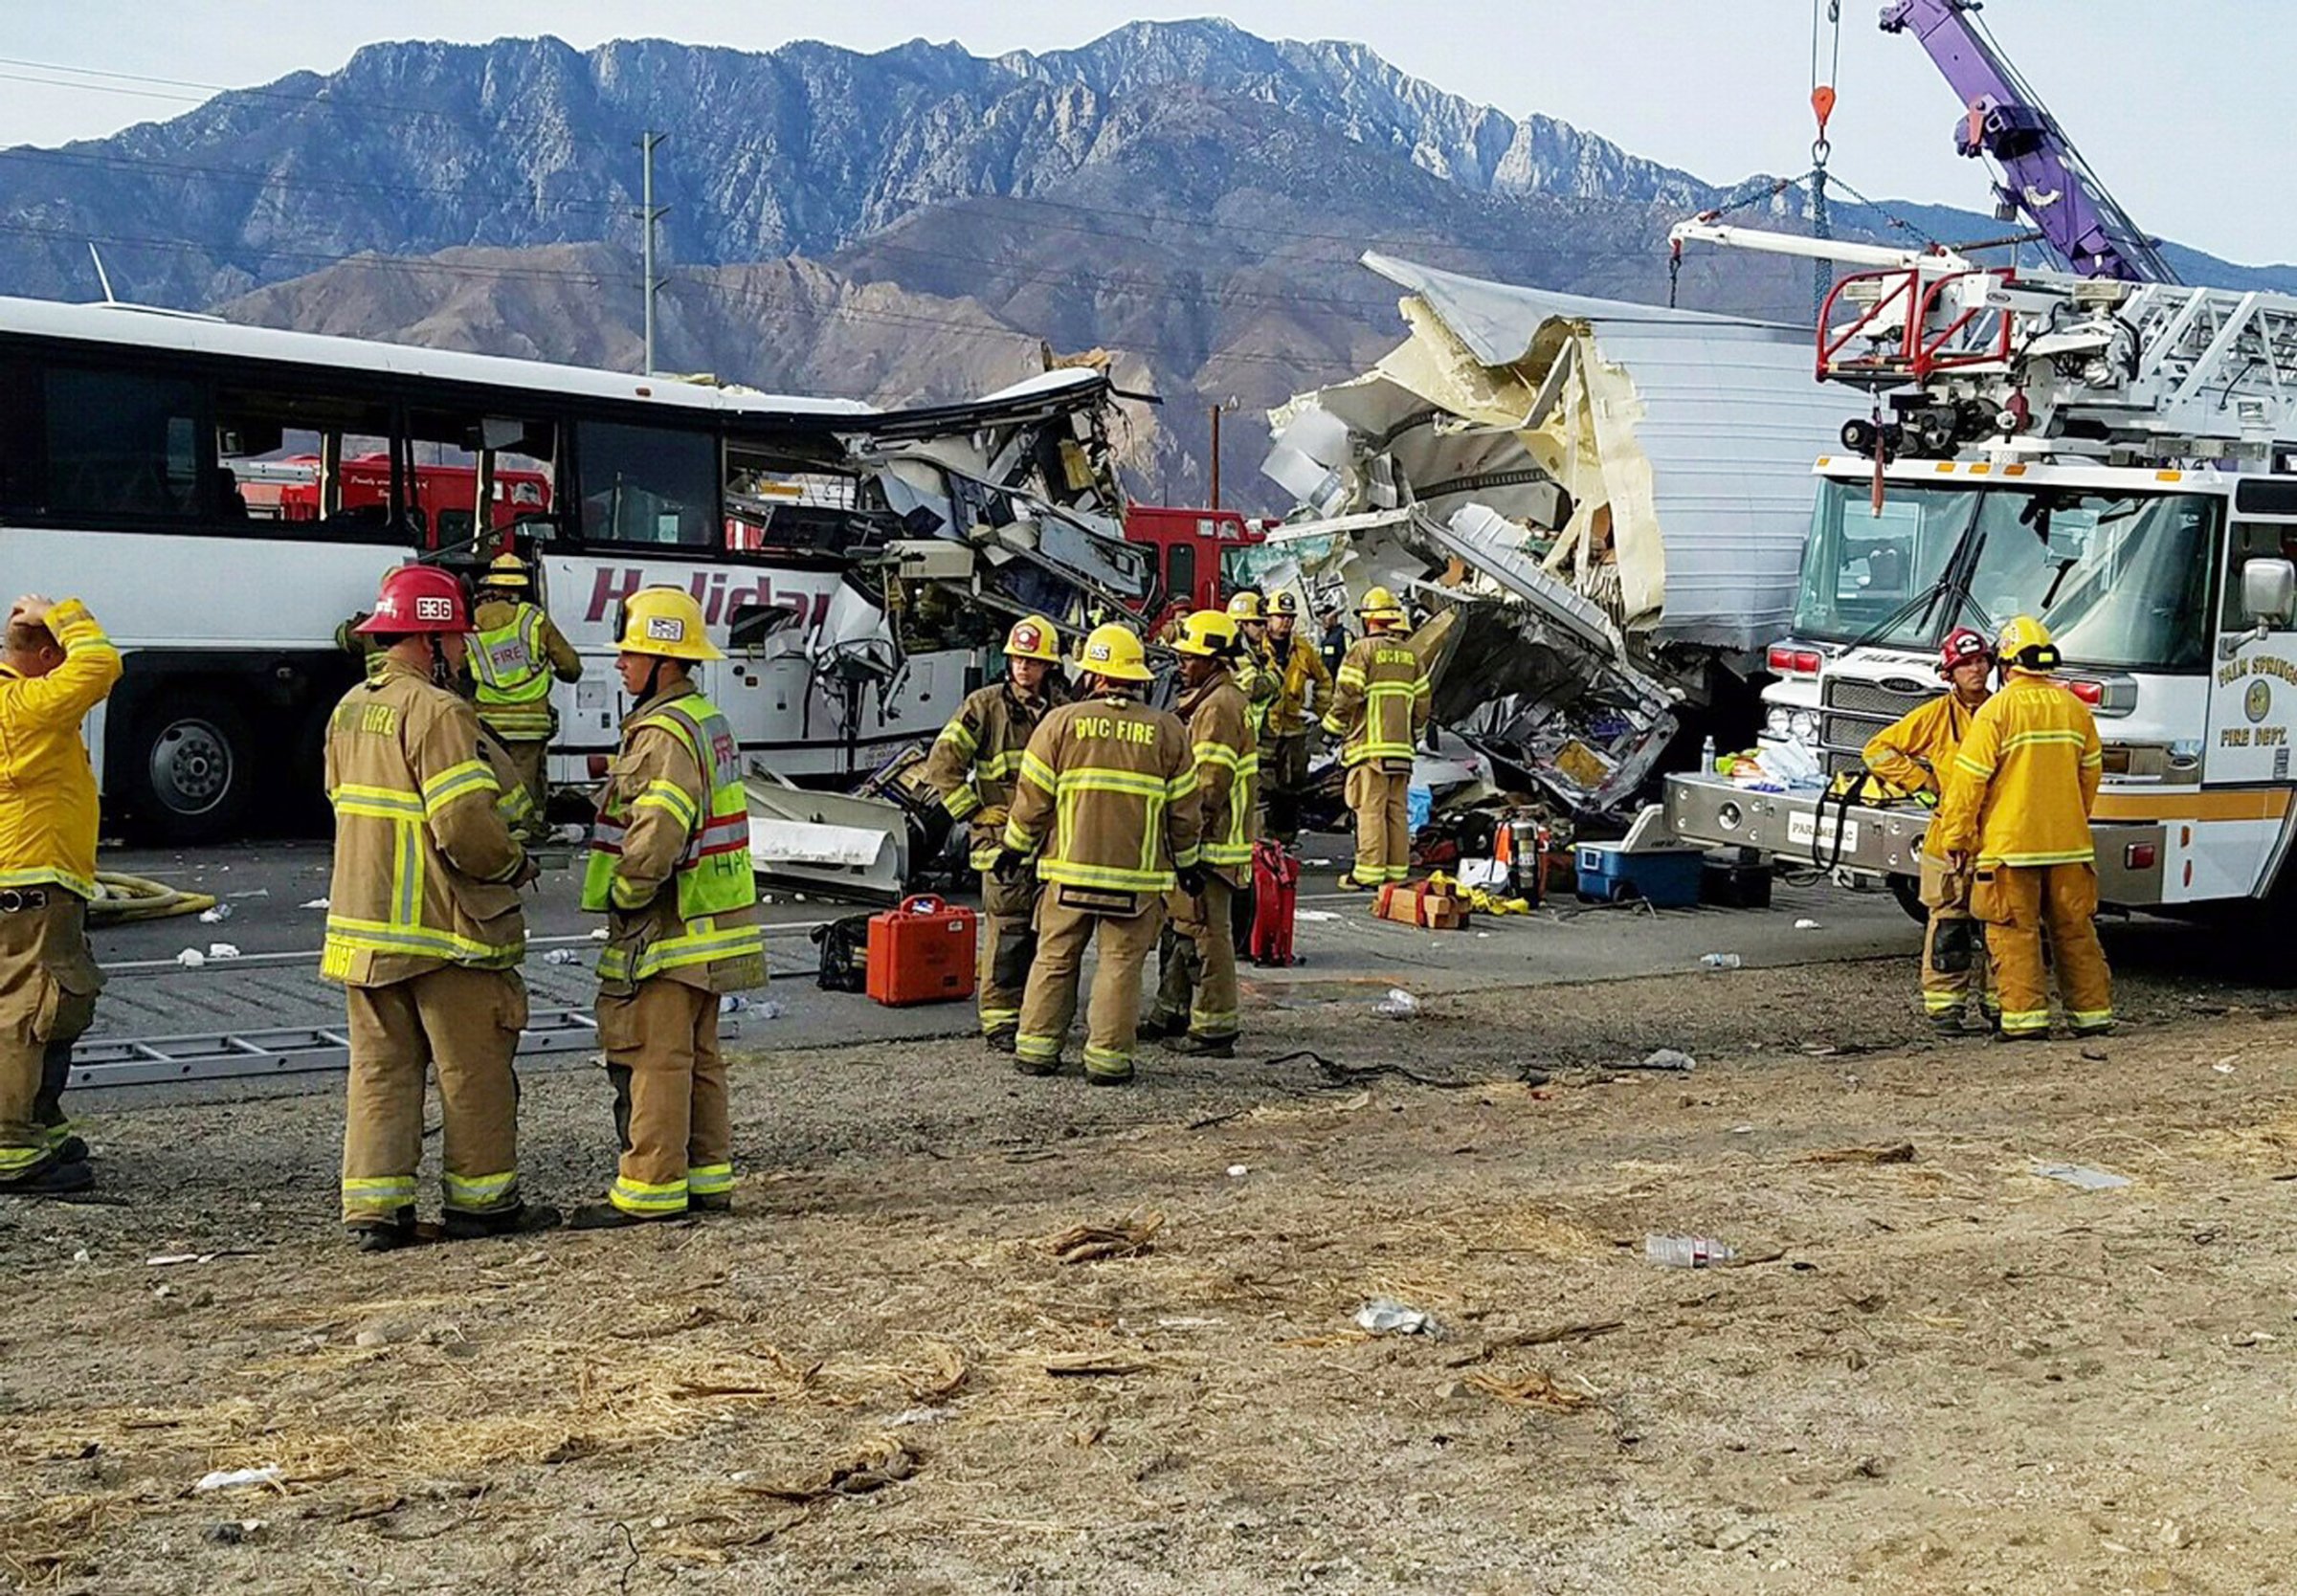 This photo provided by KMIR-TV shows the scene of crash between a tour bus and a semi-truck crashed on Interstate 10 near Desert Hot Springs, near Palm Springs, in California's Mojave Desert Sunday, Oct. 23, 2016. Multiple deaths and injuries were reported. (KMIR-TV via AP)